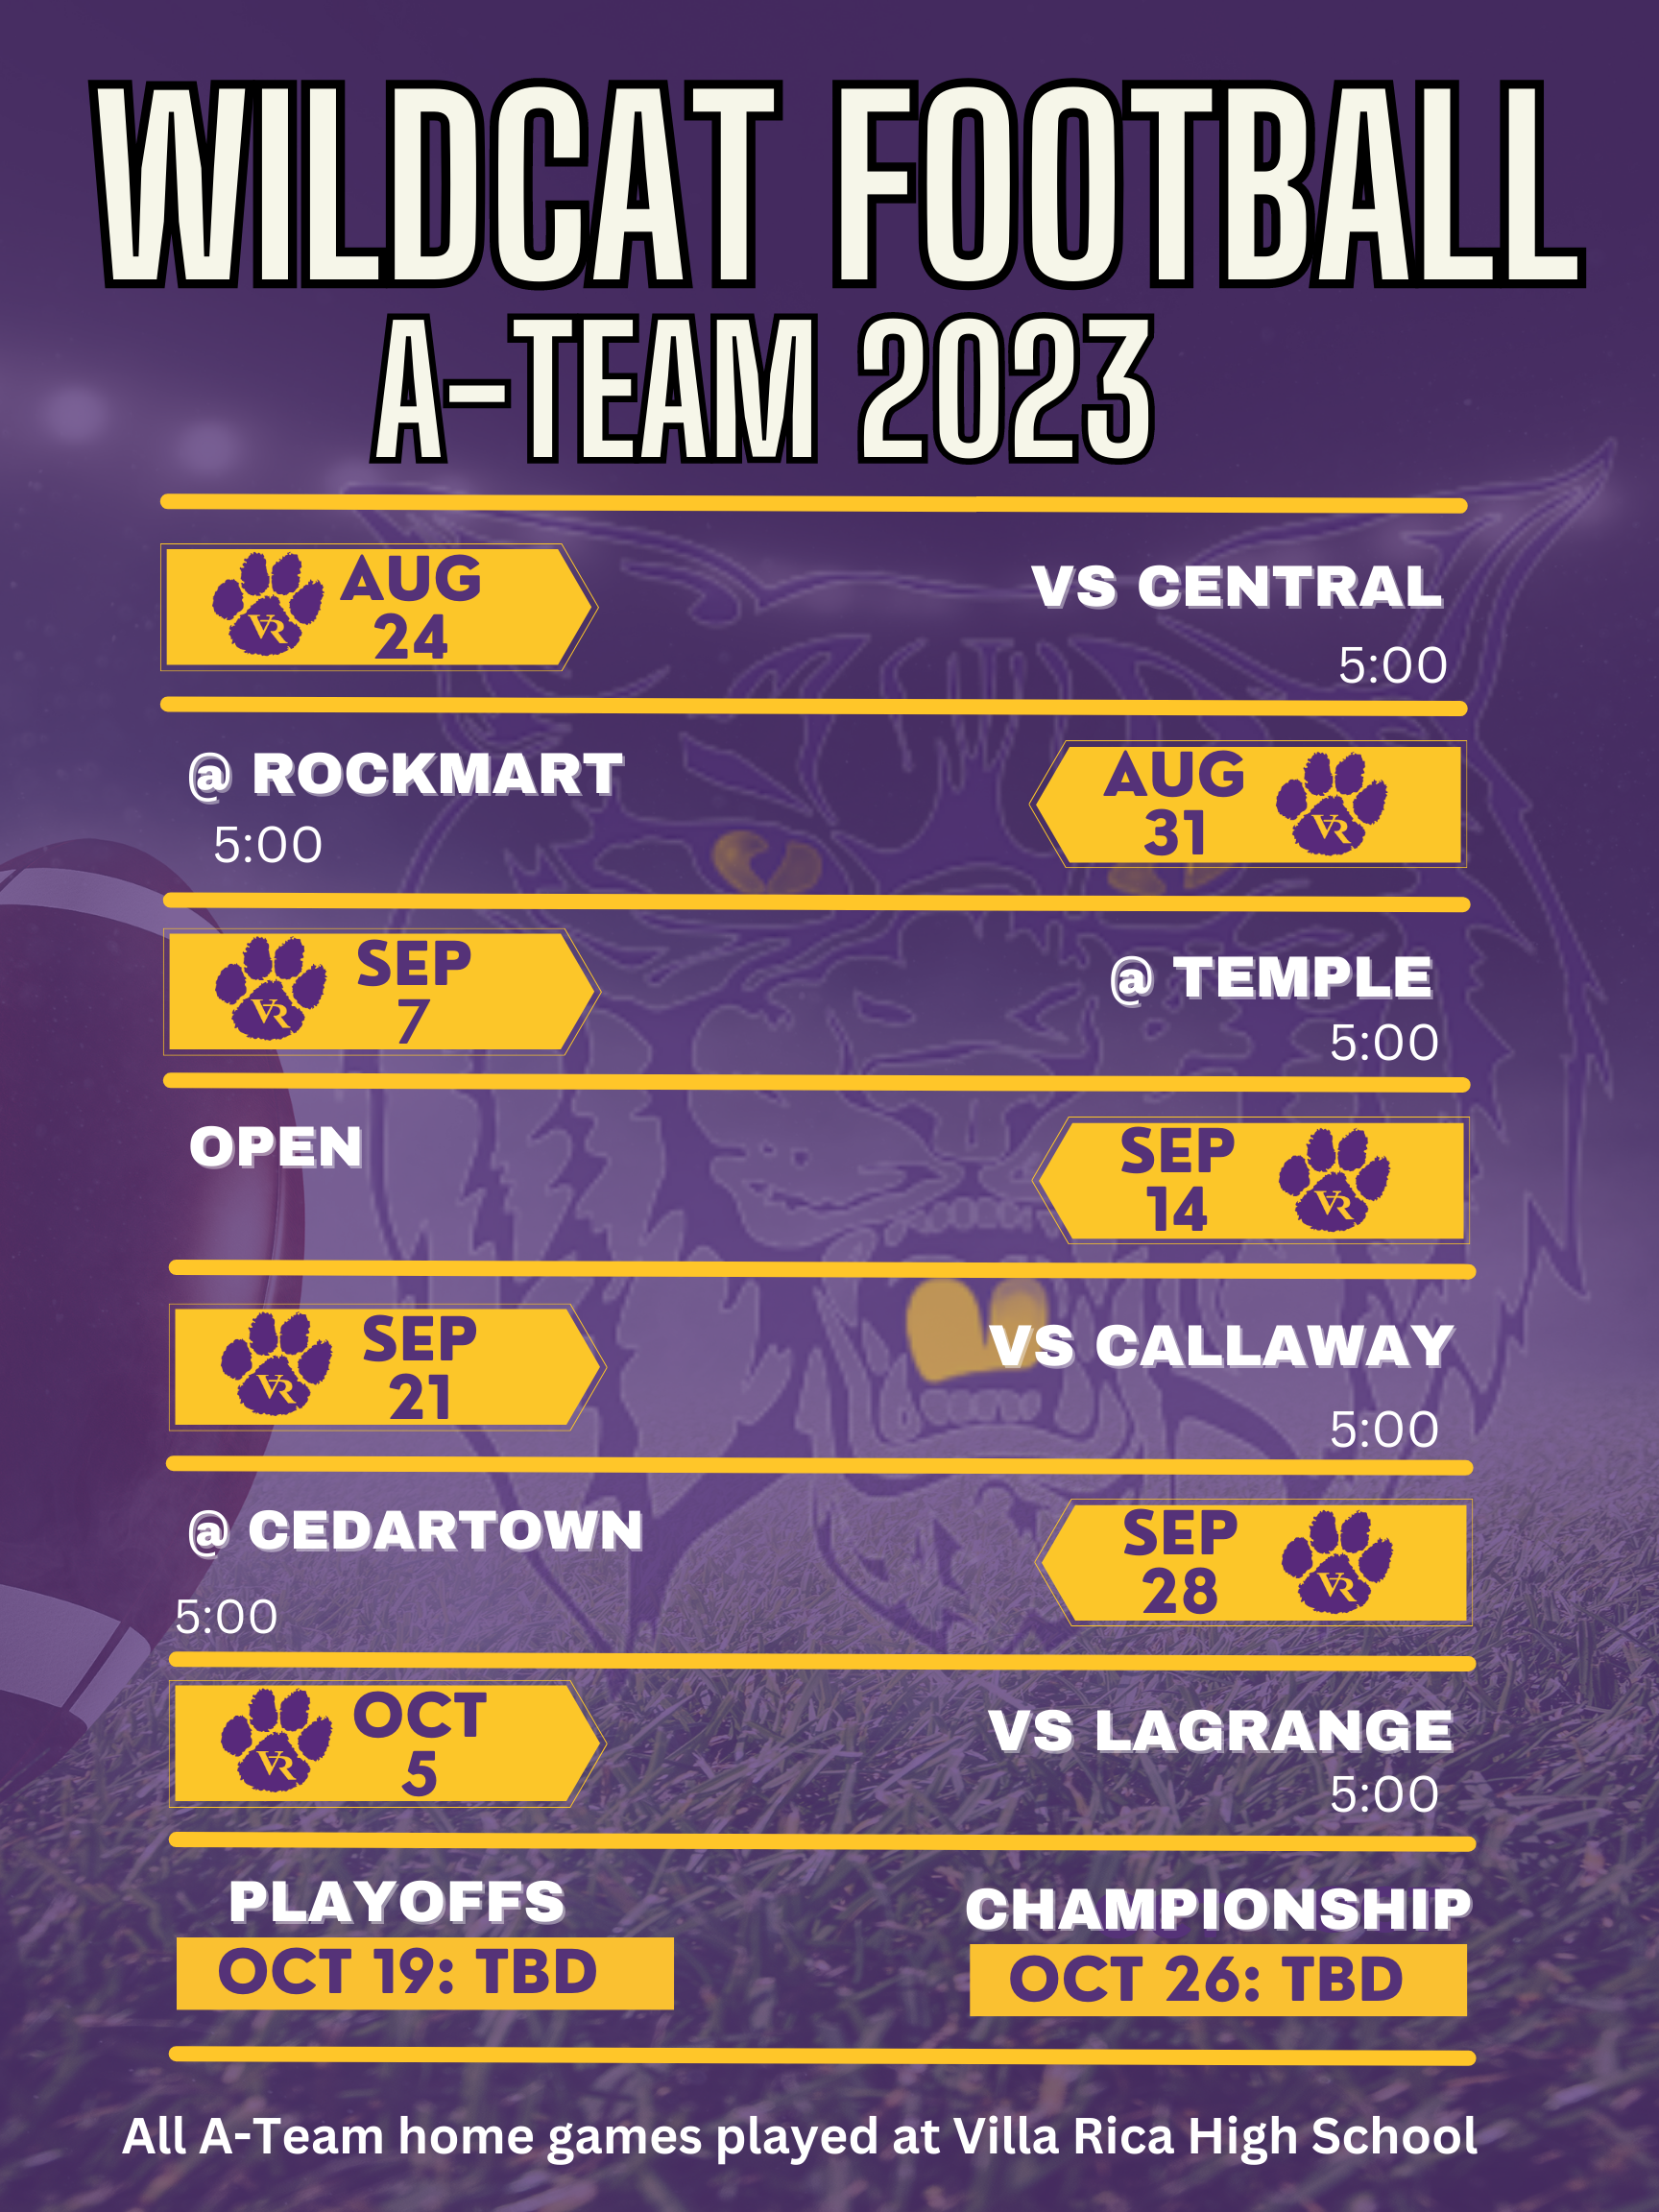 May be an image of basketball, football and text that says 'WILDCAT FOOTBALL A-TEAM 2023 AUG 24 vs CENTRAL 5:00 ROCKMART 5:00 AUG 31 SEP 7 OPEN TEMPLE 5:00 SEP 14 SEP 21 vs CALLAWAY 5:00 CEDARTOWN 5:00 SEP 28 OCT 5 vs LAGRANGE 5:00 PLAYOFFS OCT 19: TBD CHAMPIONSHIP OCT 26: TBD All A-Team home games played at Villa Rica High School'